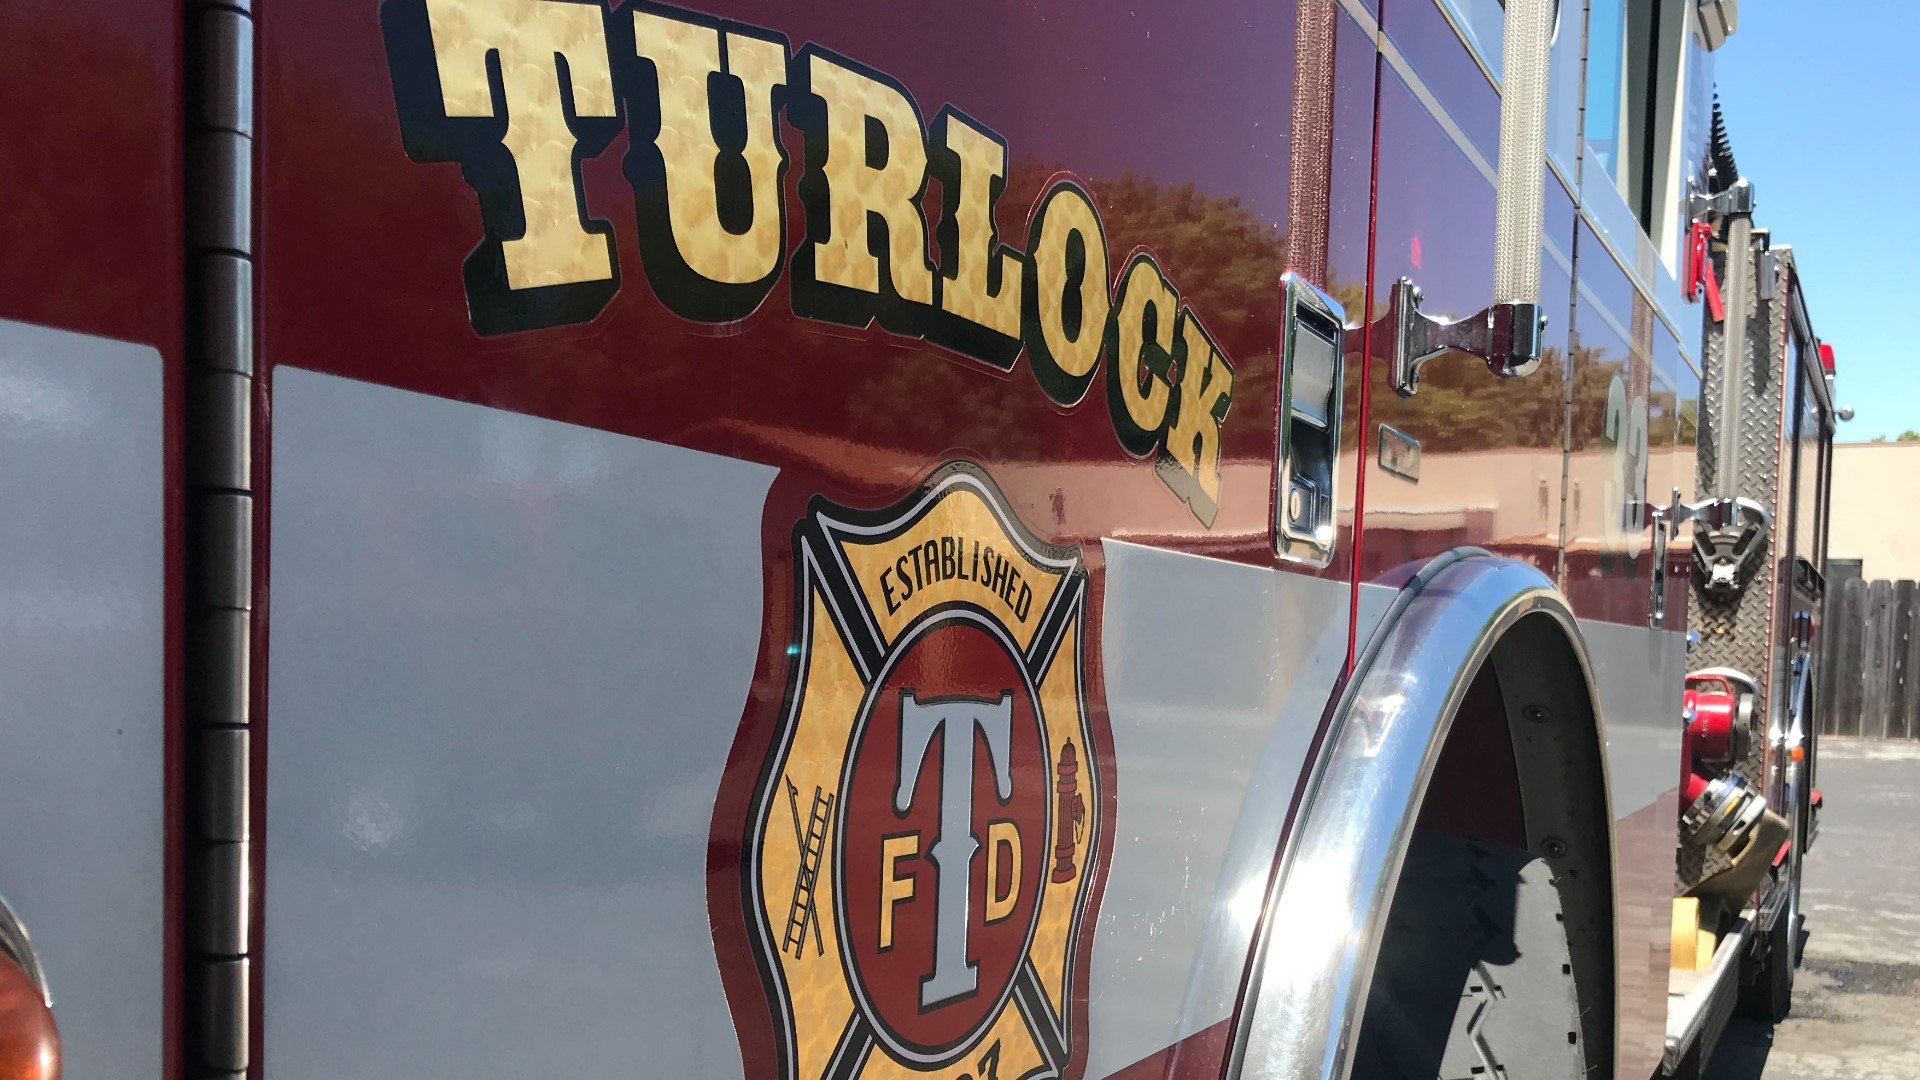 The Turlock Fire Department has decided to essentially take a fire engine out of service any day a firefighter calls out sick or takes a vacation day. This comes after major budget cuts have reduced staffing to just 12 firefighters a day, down from 13.